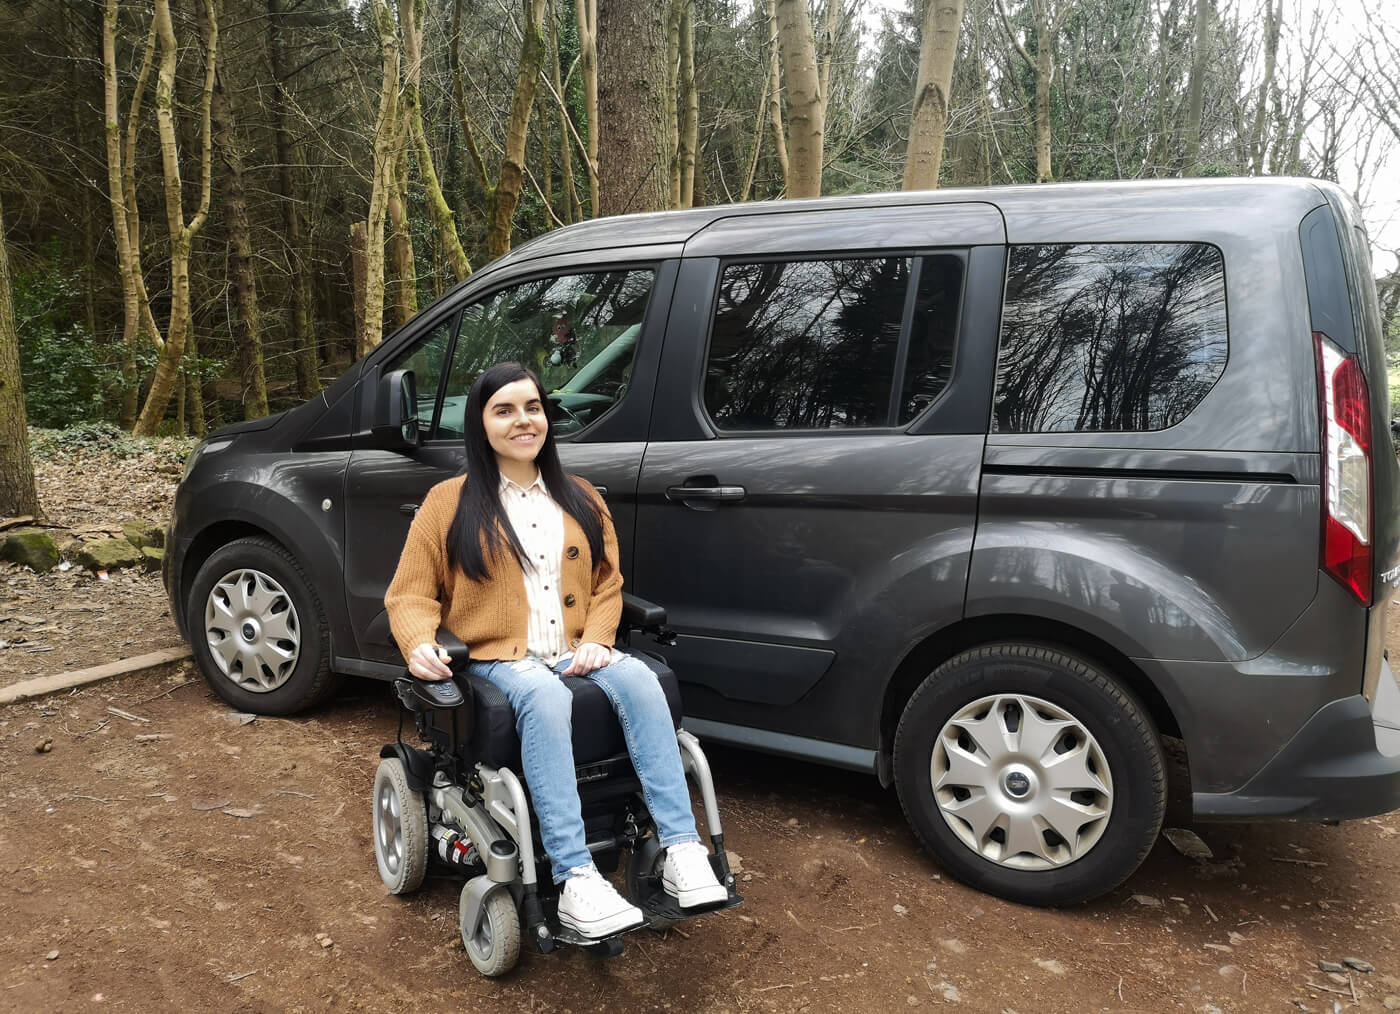 Emma, a power wheelchair user sitting in front of her wheelchair accessible vehicle. Emma is smiling and looking at the camera.